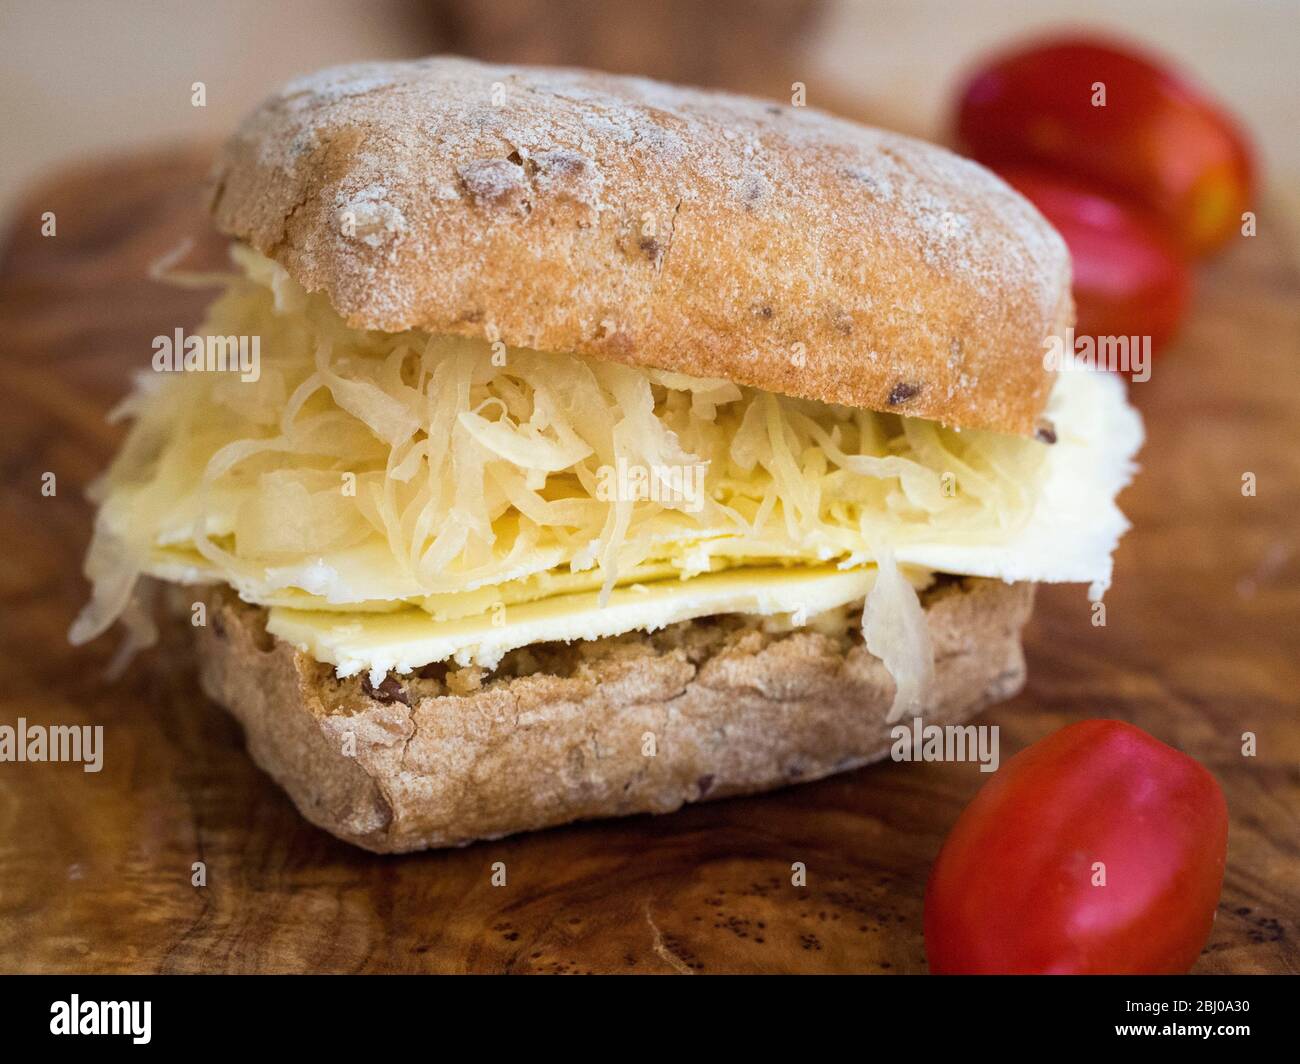 Nourishing lunchtime sandwich of thinly sliced Cheshire cheese with sauerkraut on brown seeded ciabatta. (Gluten free bread) Stock Photo